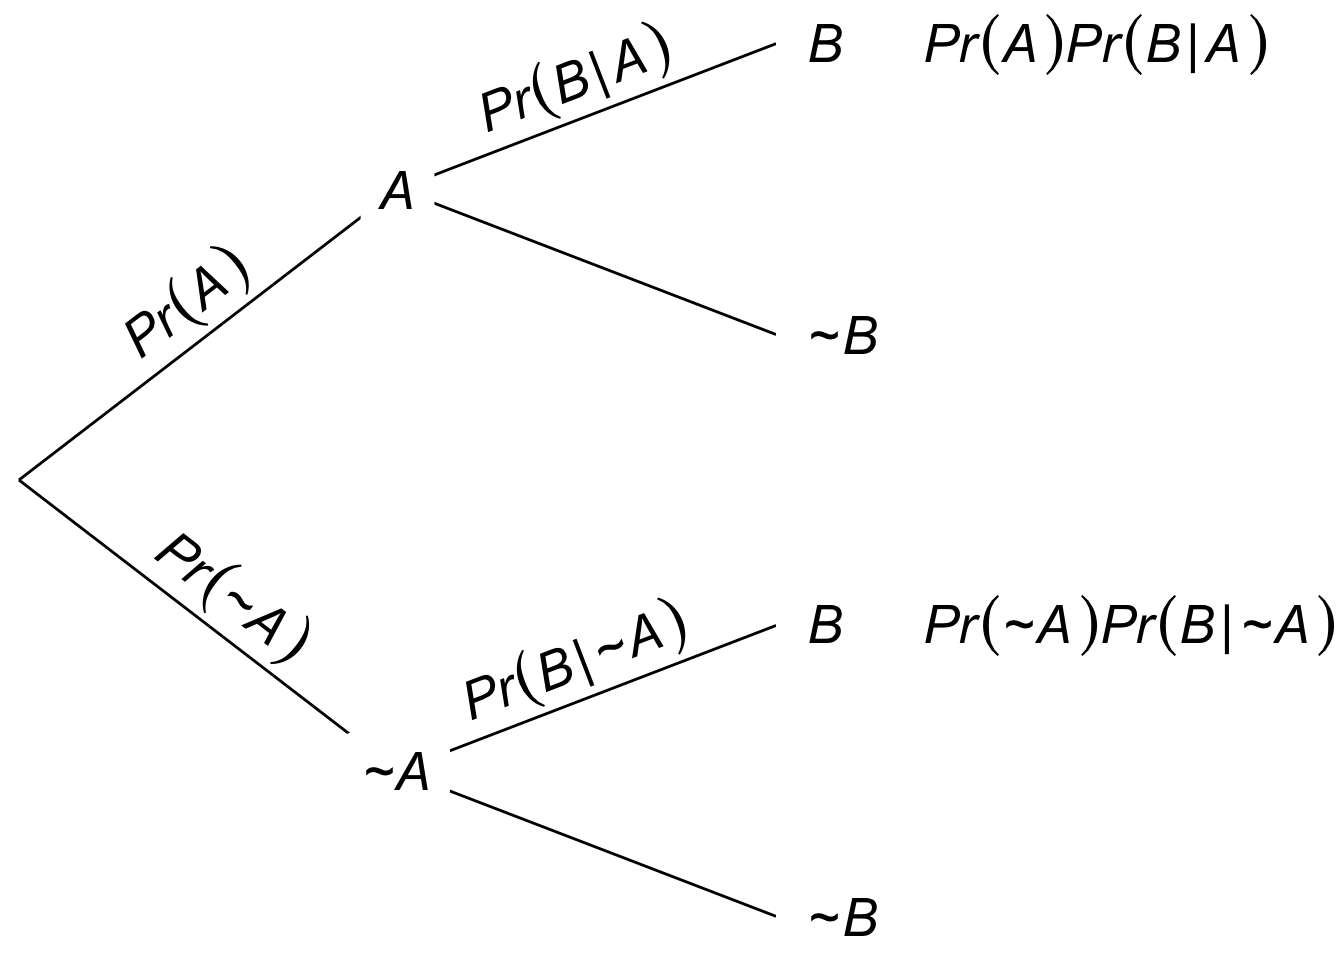 A tree diagram for the long form of Bayes' theorem. The definition of conditional probability tells us $\p(A \given B)$ is the first leaf divided by the sum of the first and third leaves.